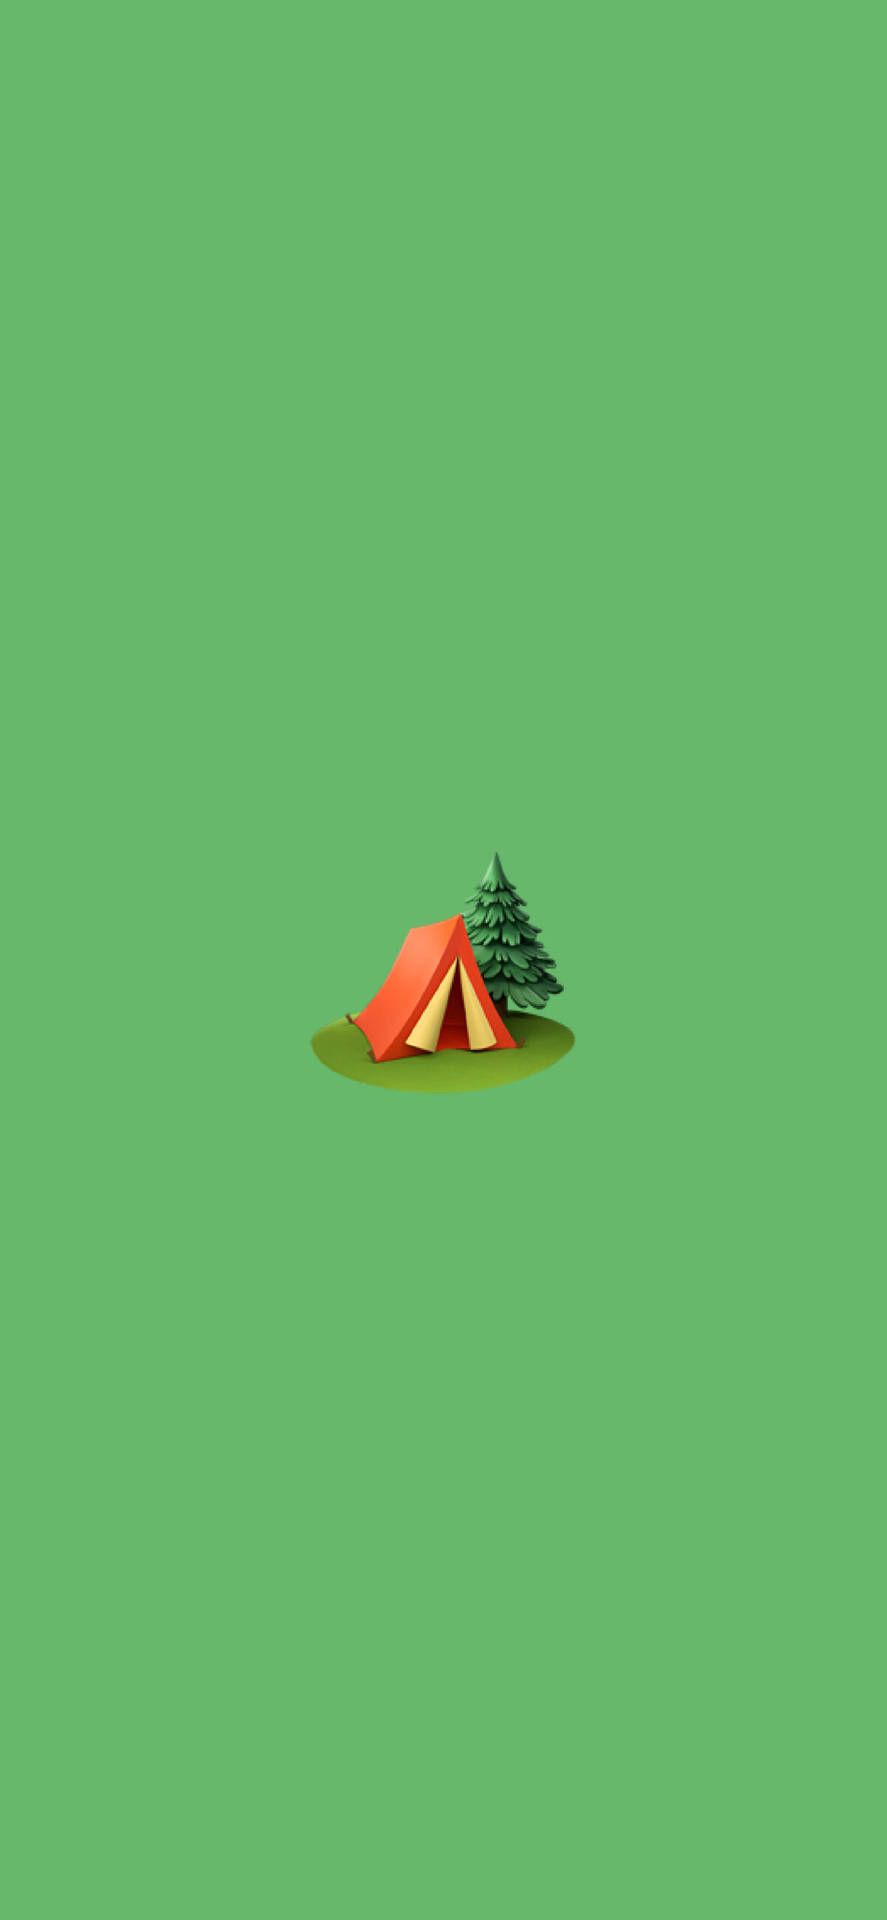 Camp Camp Tent In Green Wallpaper